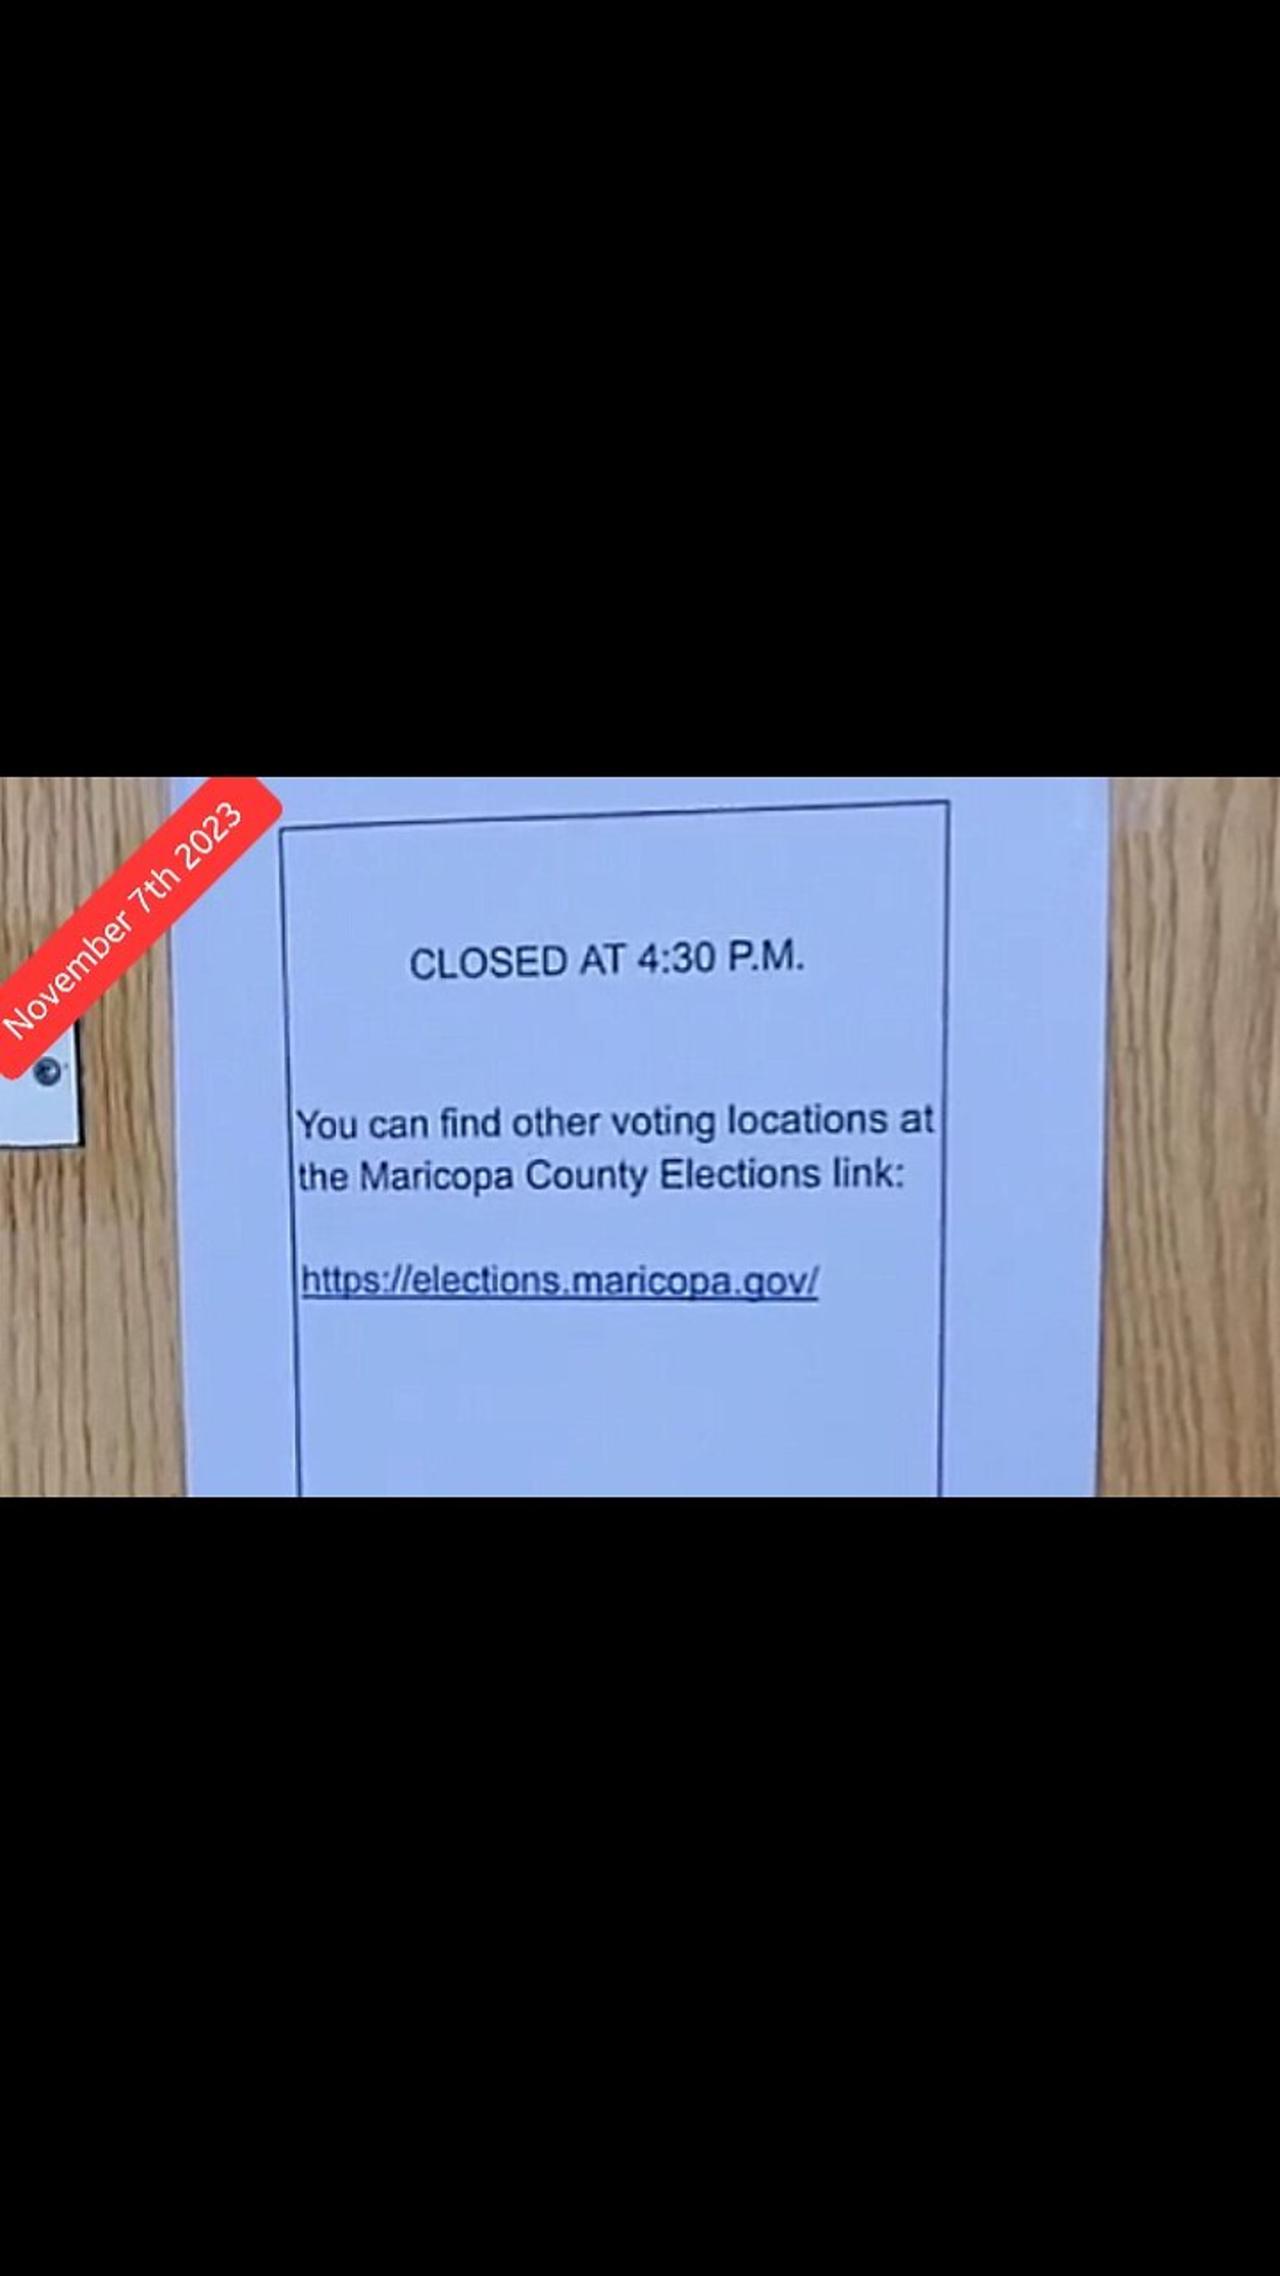 Voters Disenfranchised as Polling Closes Early in Paradise Valley Arizona